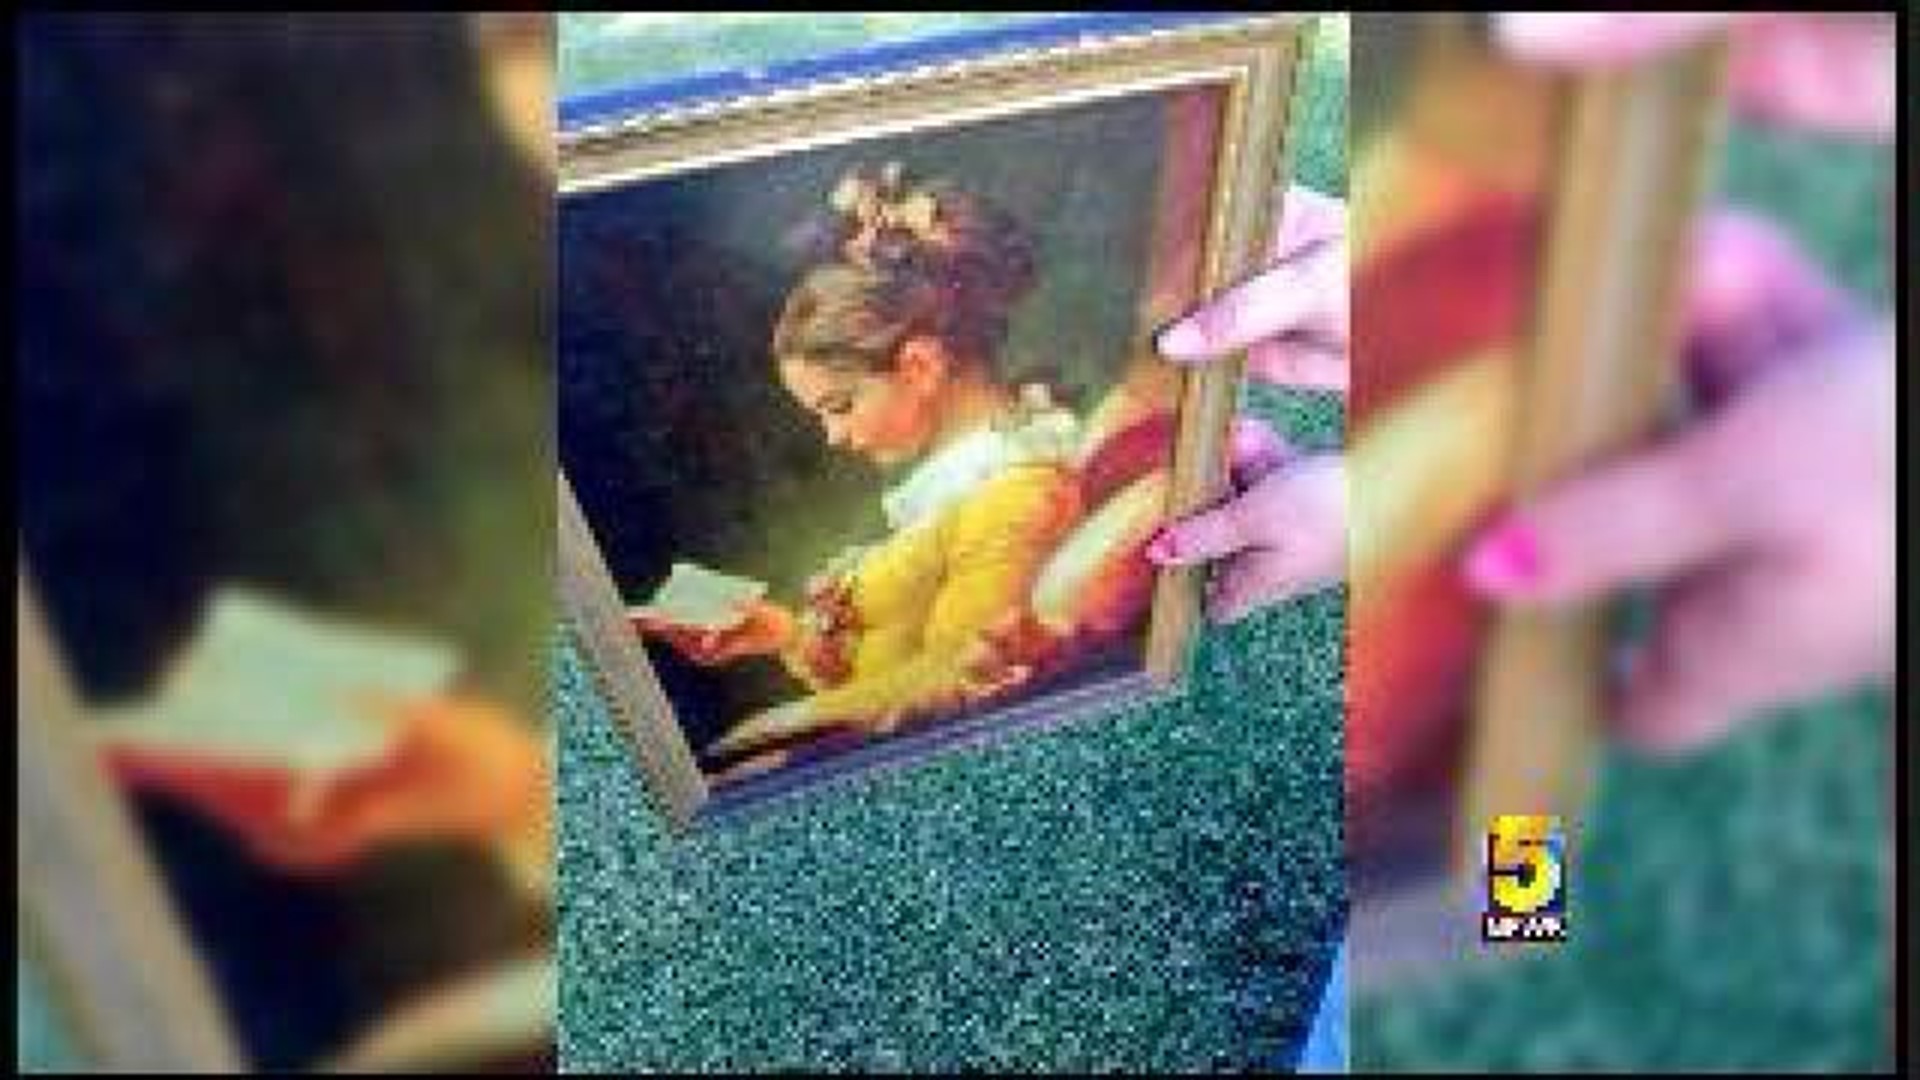 Family Salvages Bible and Picture in Fire